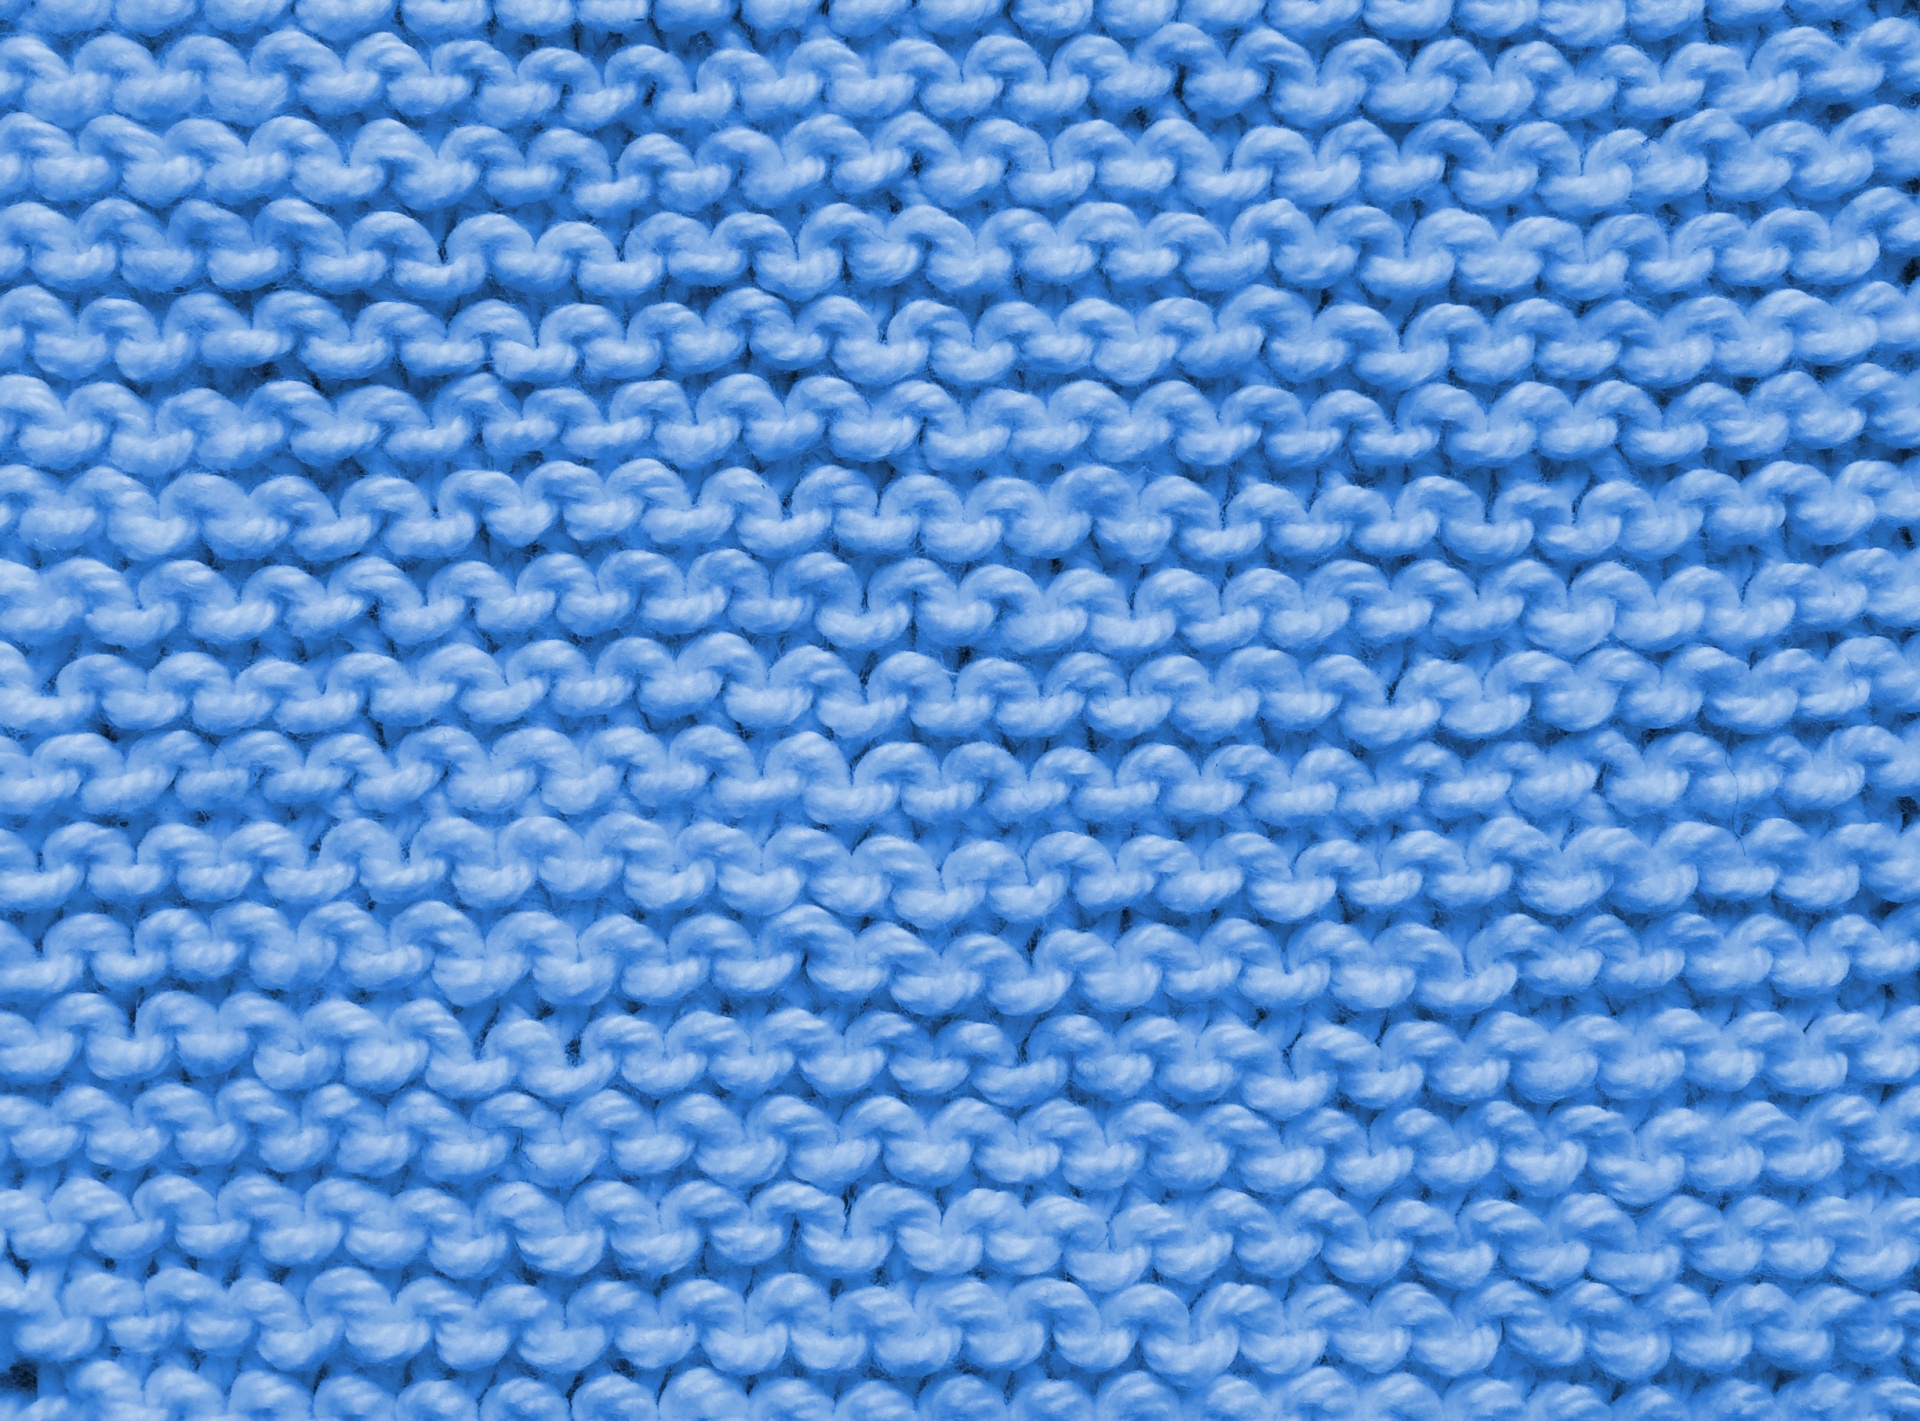 Knitting Texture Background Blue